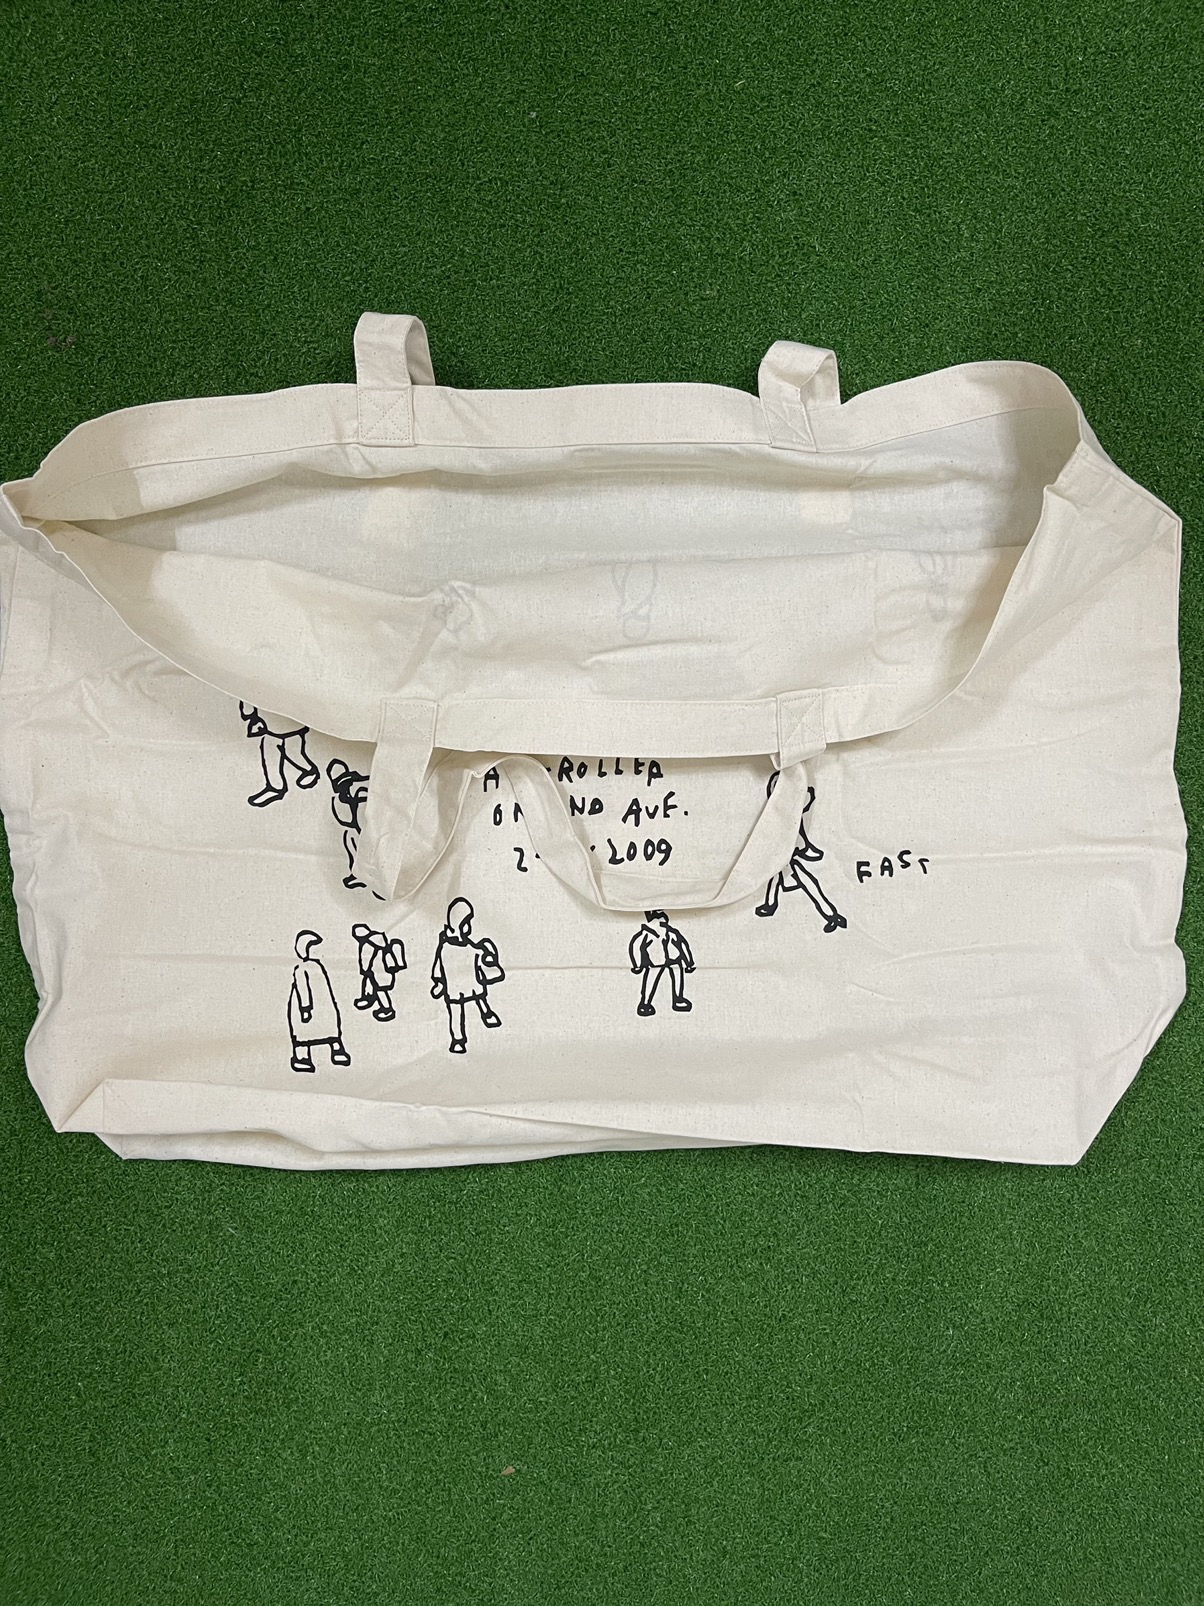 Outdoor Style Go Out! - New Jason Polan Tote Bag Limited Edition / Uniqlo / Eva - 10